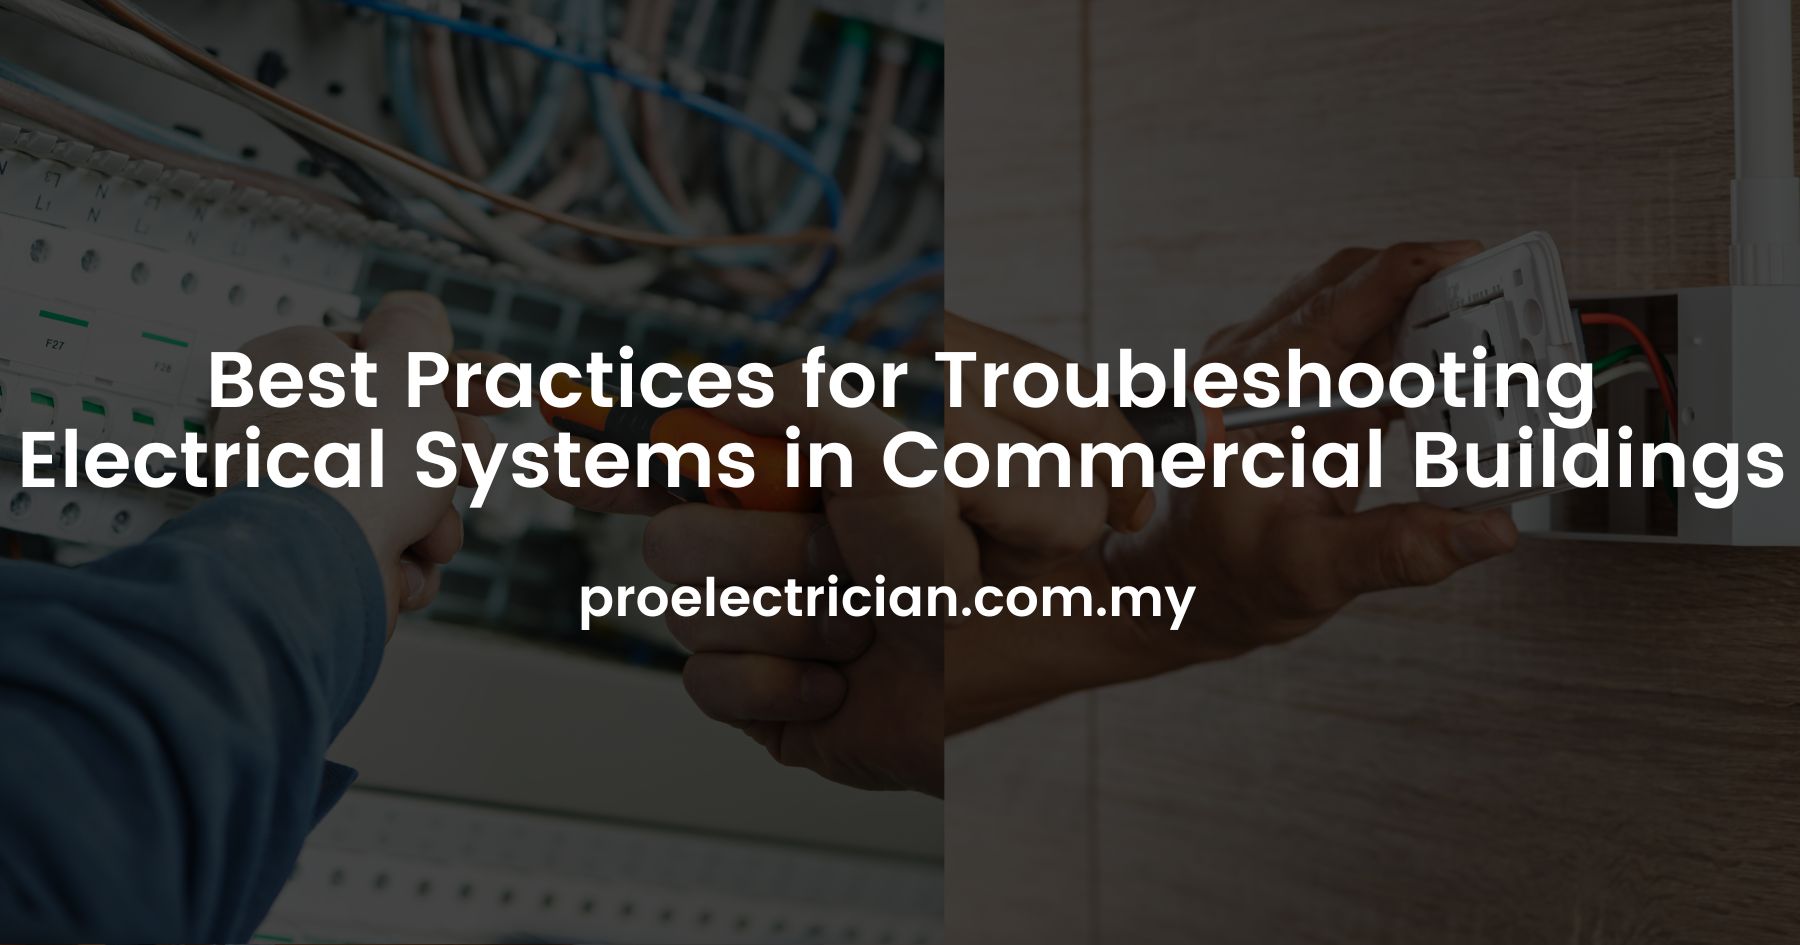 Best Practices For Troubleshooting Electrical Systems In Commercial Buildings